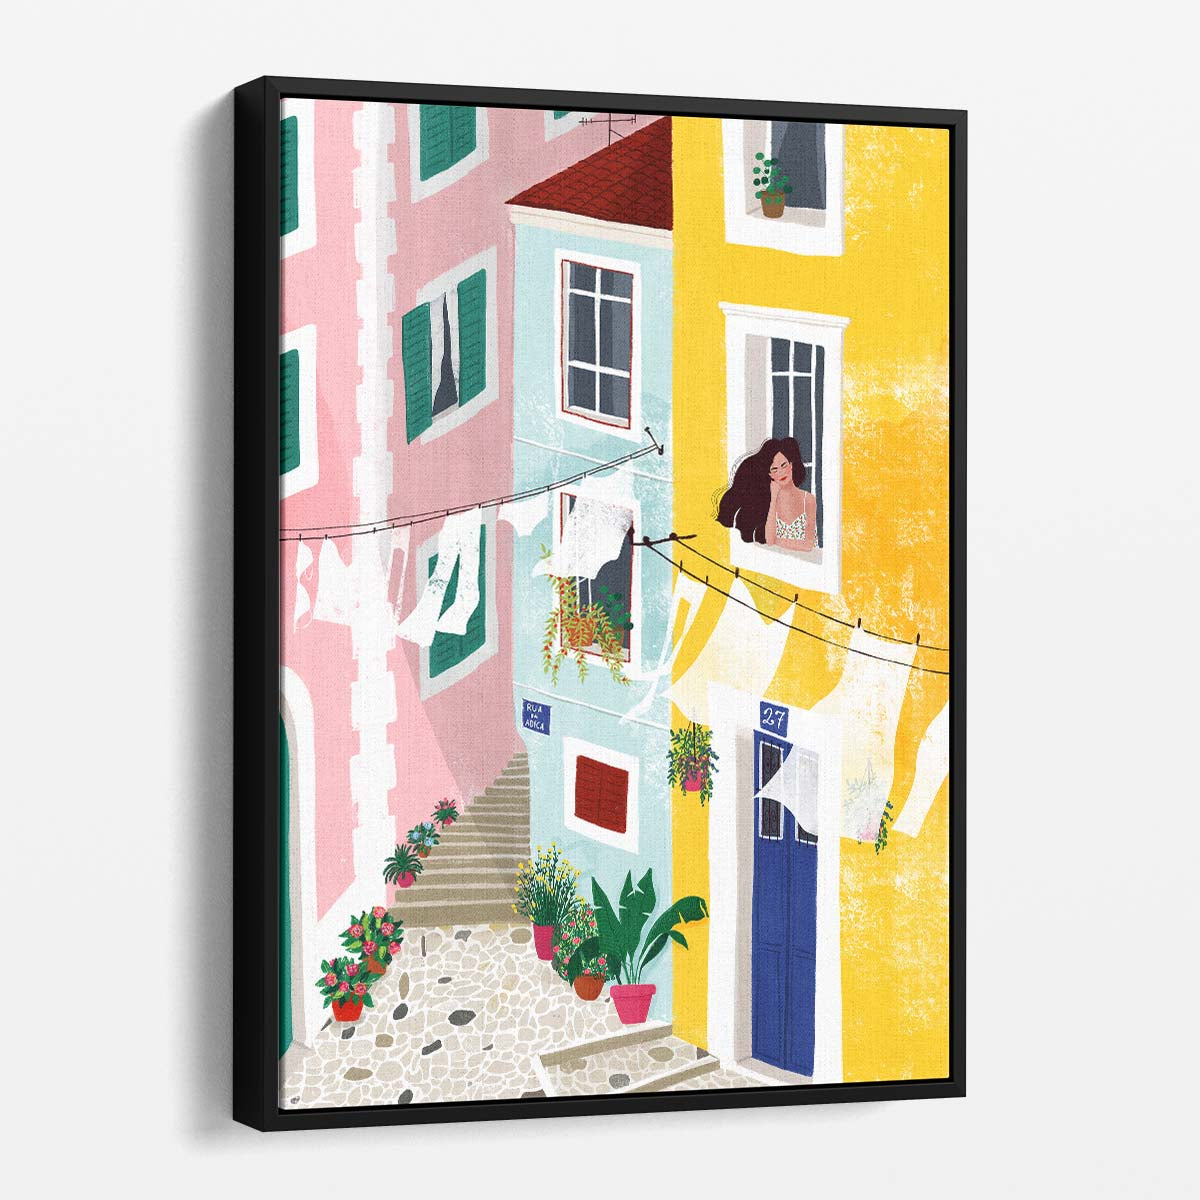 Colorful Urban Summer Girl Illustration Wall Art by Luxuriance Designs, made in USA